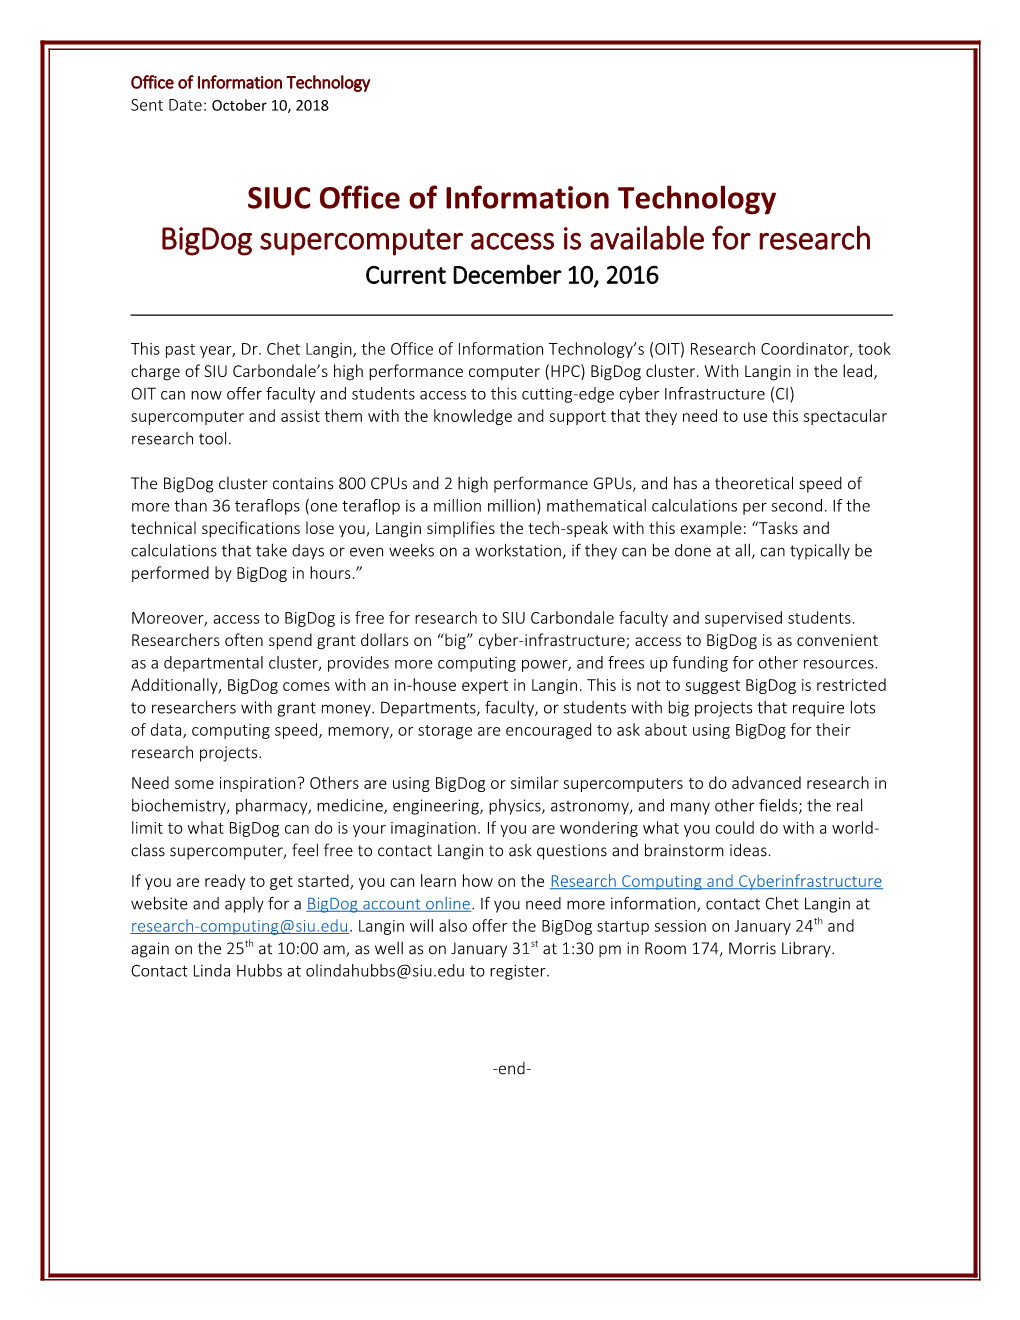 SIUC Office of Information Technology